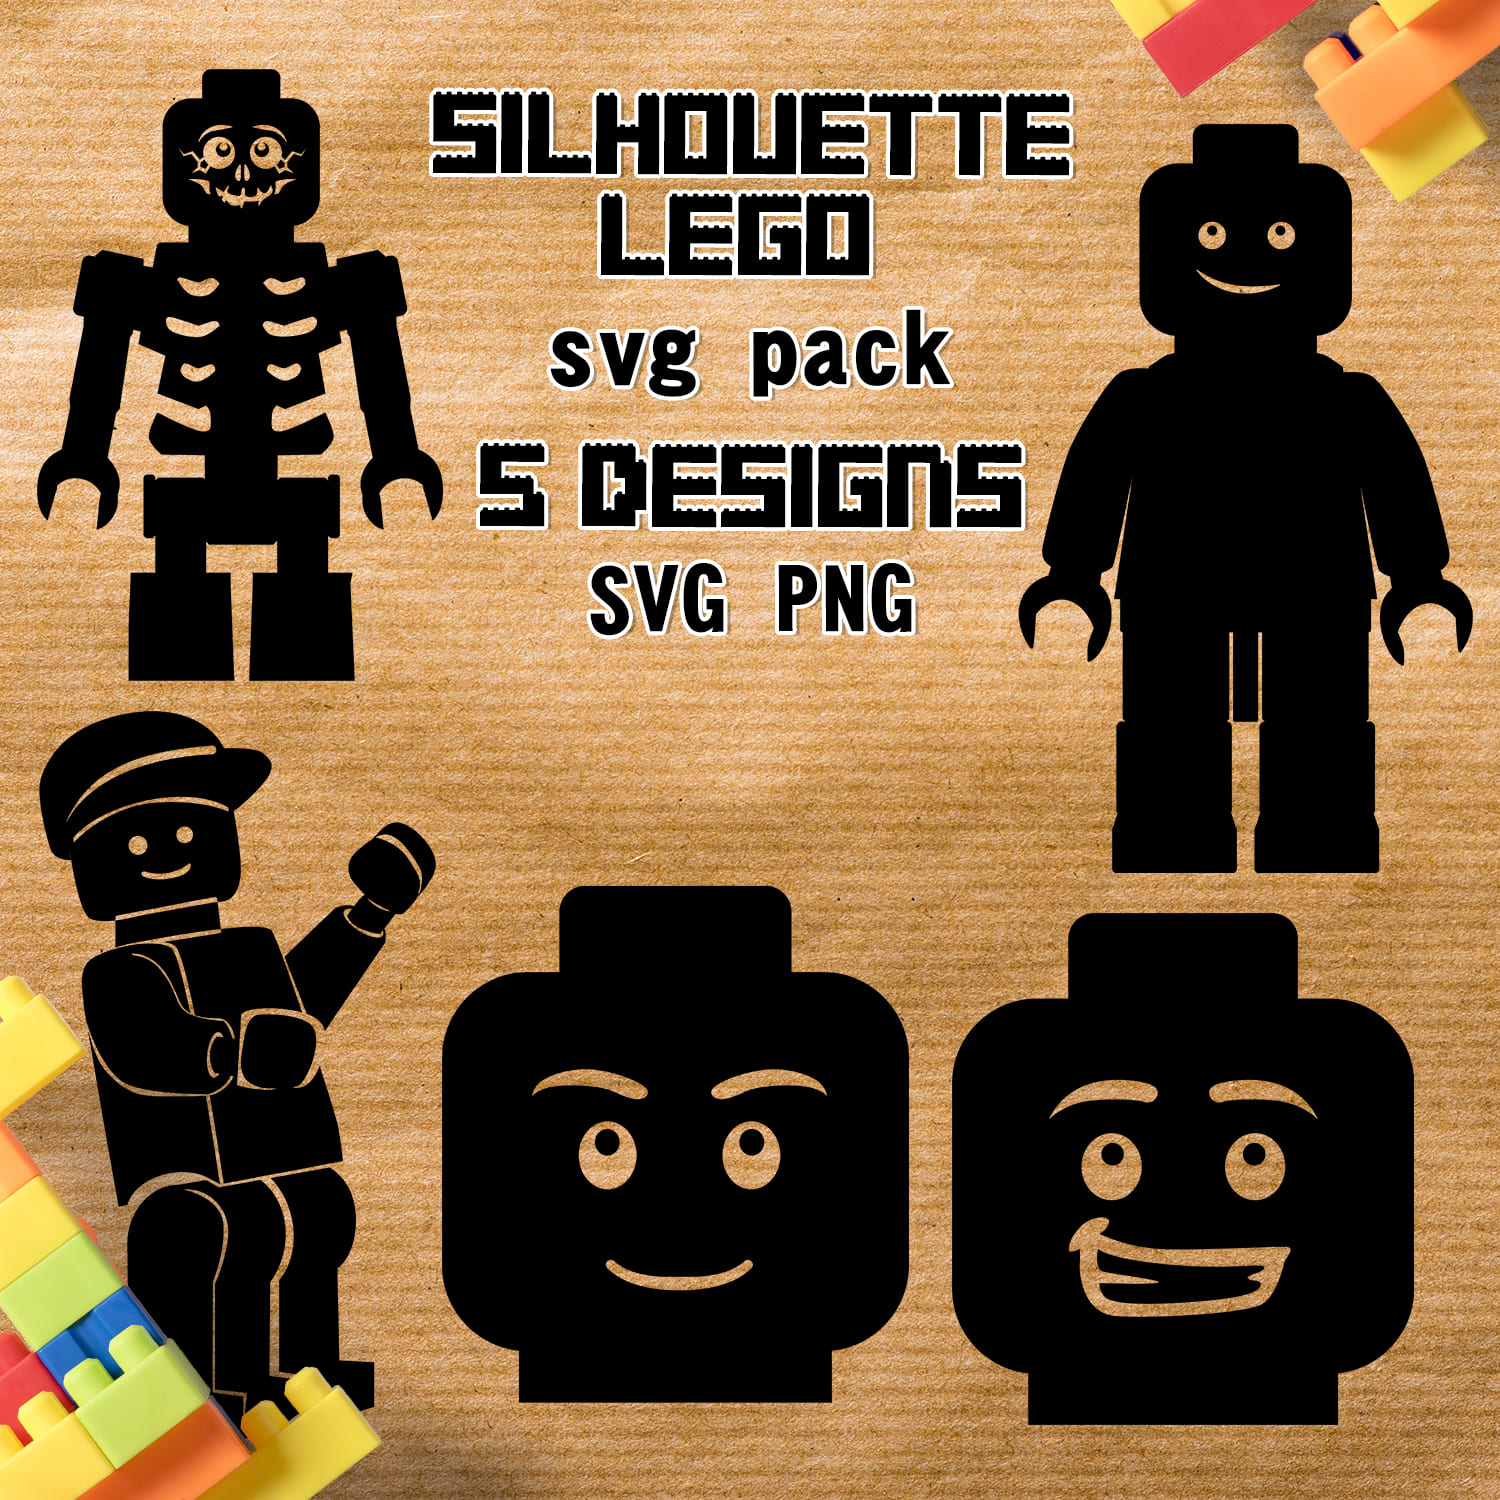 silhouette lSilhouette lego svg - main image preview.